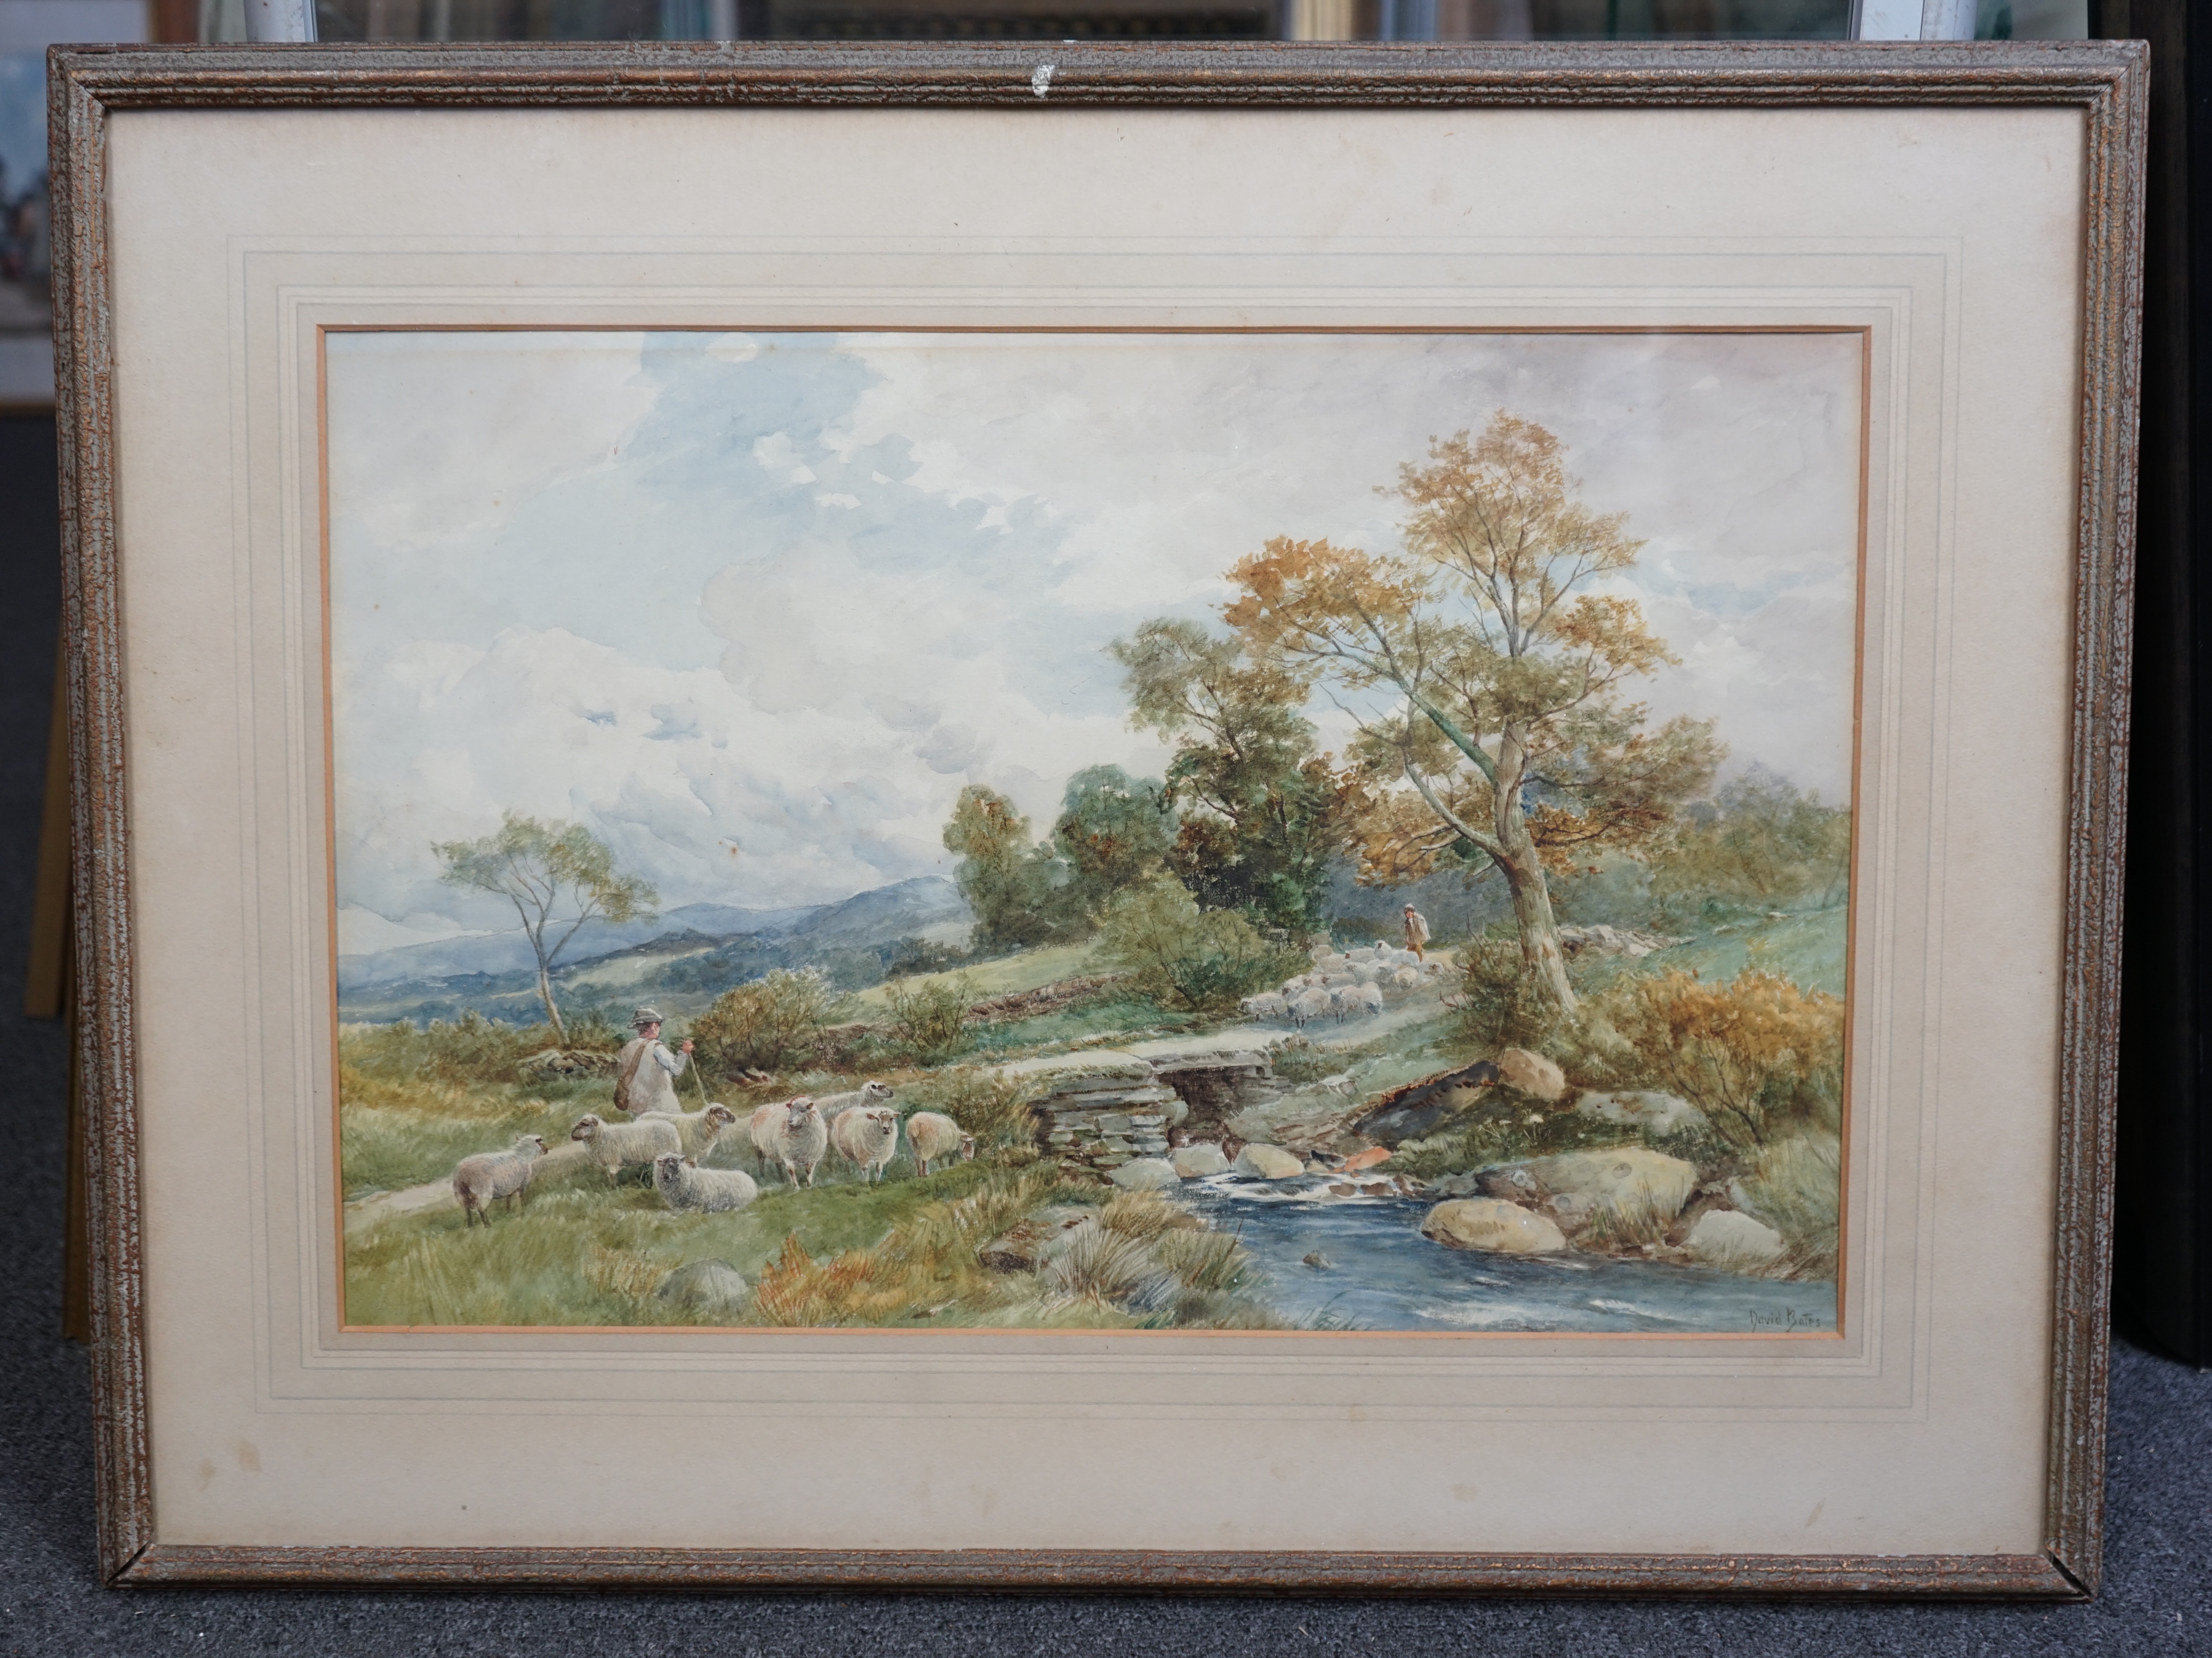 David Bates (British, 1840-1921), watercolour, 'The Brook, Capel Curig, Wales', signed, 34.5 x 52cm. Condition - fair, some spots of foxing and browning